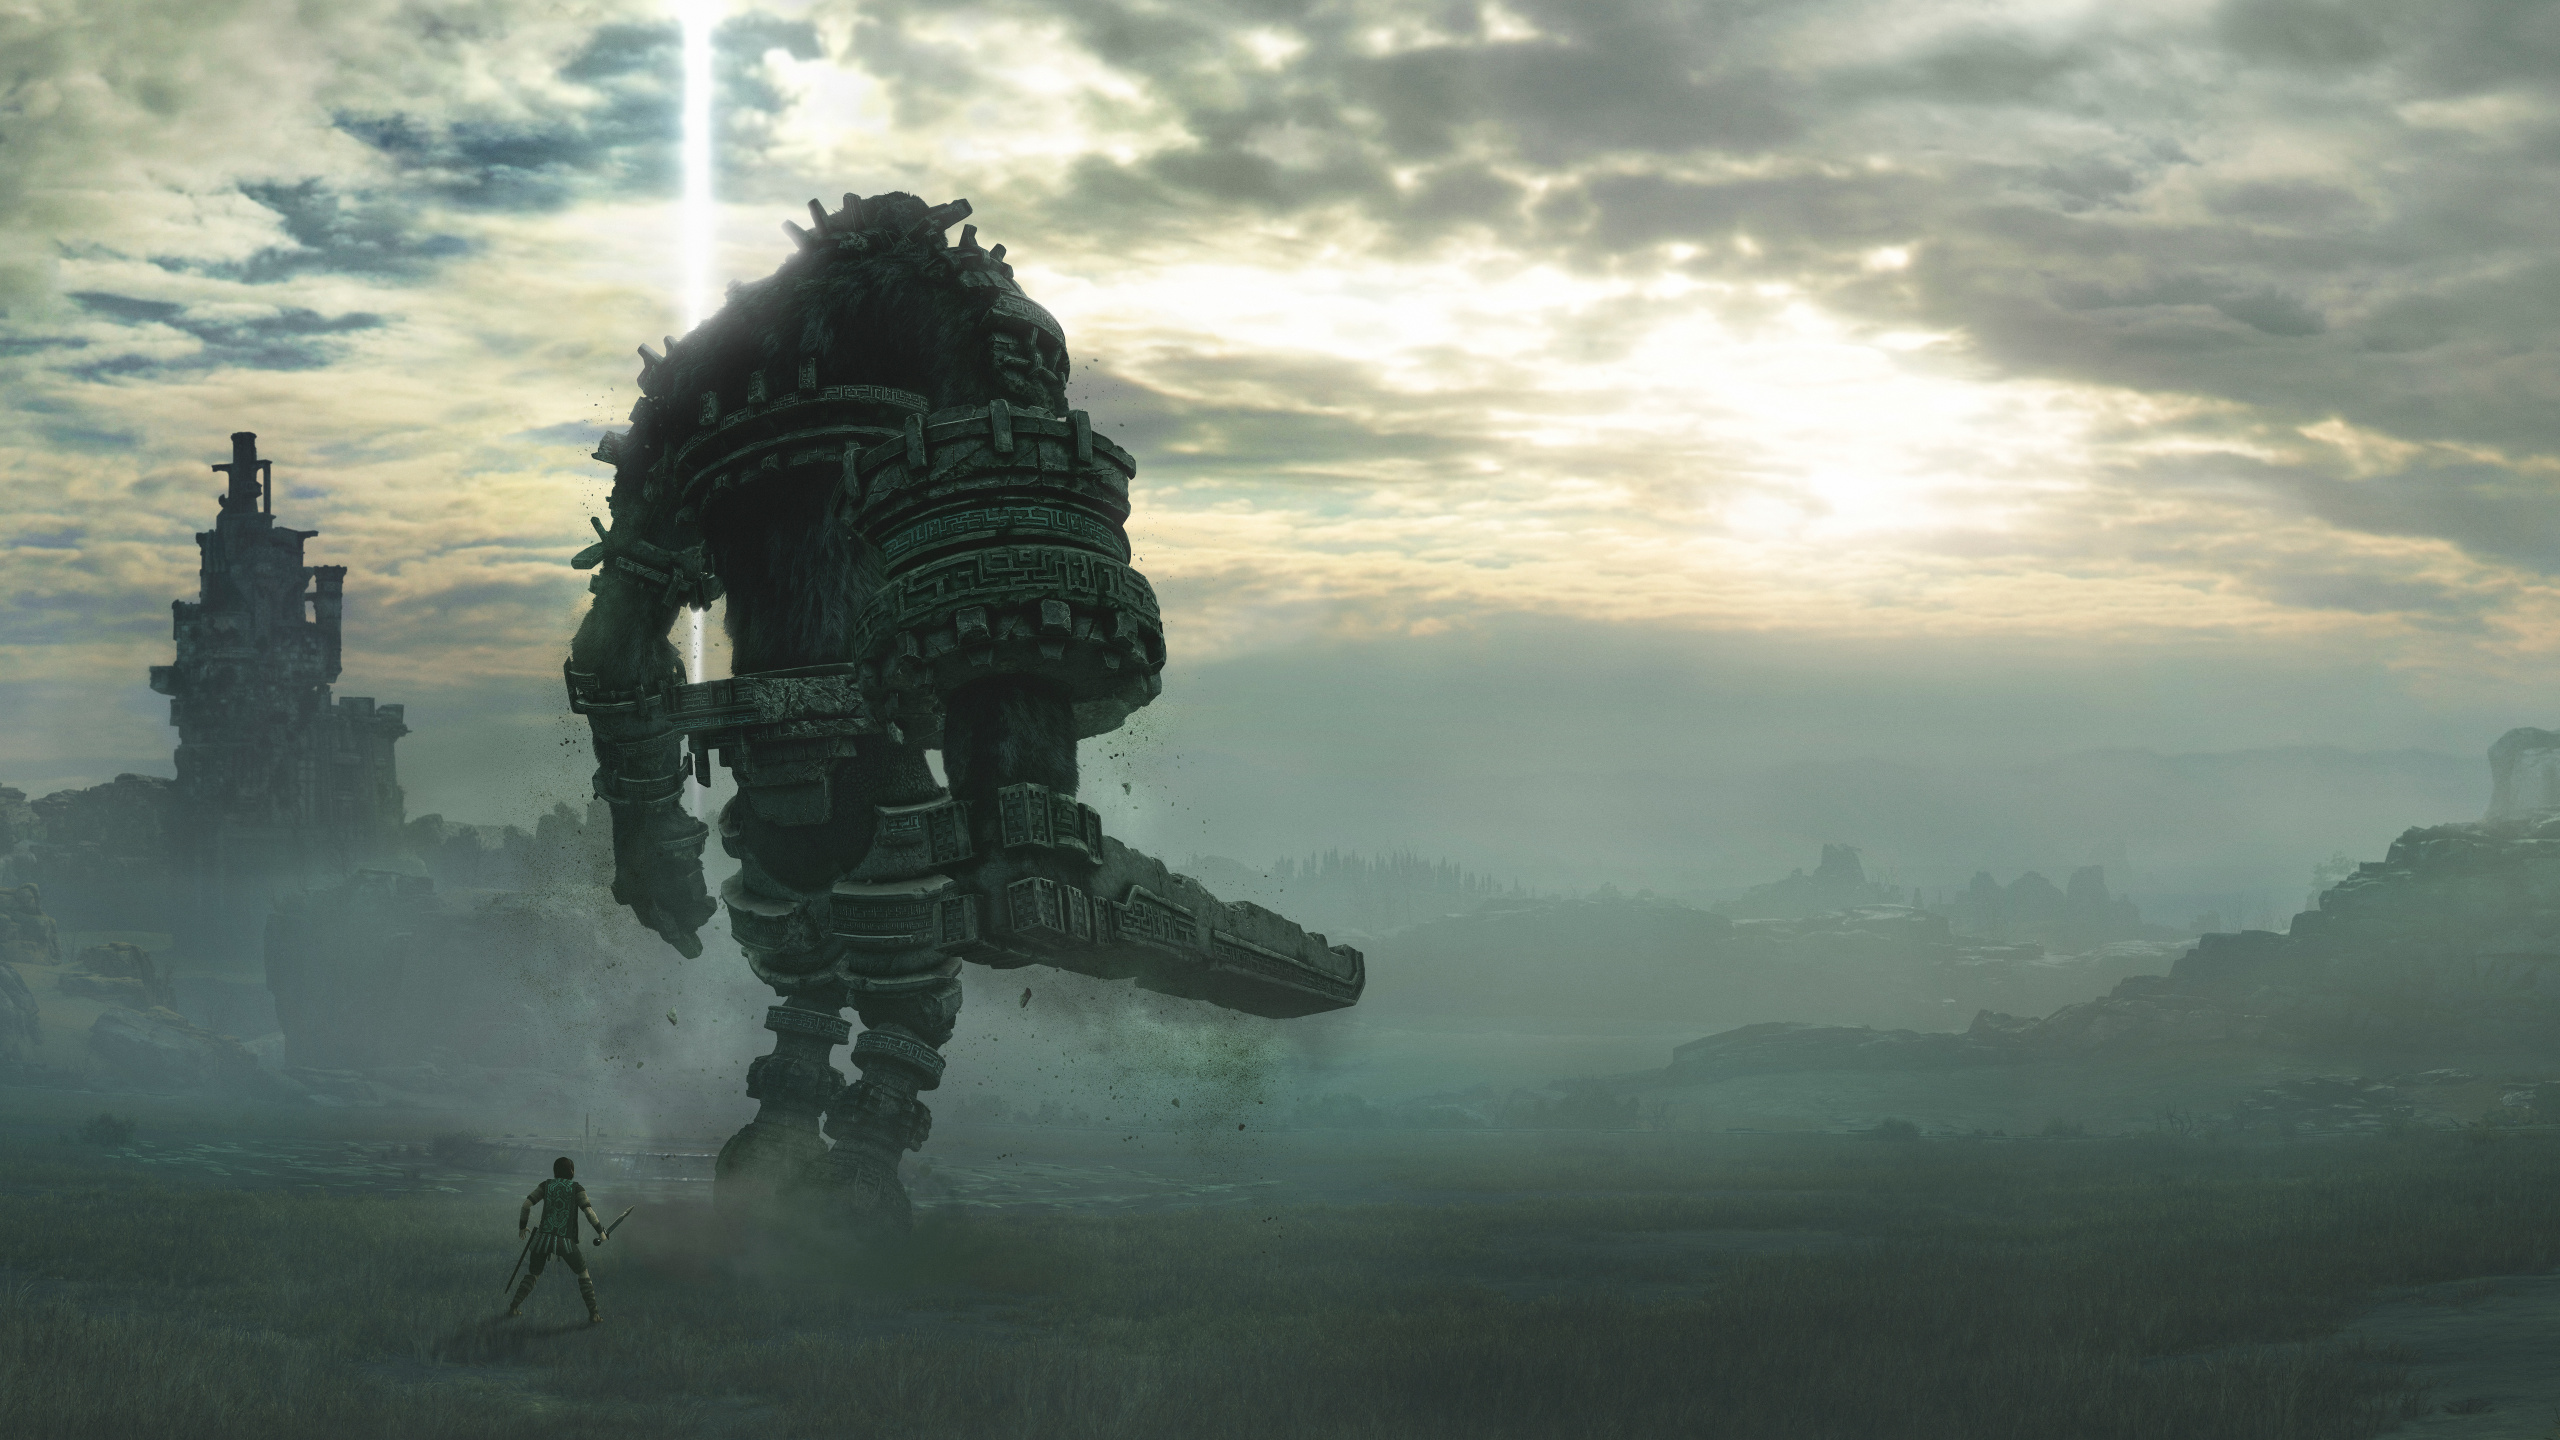 Black and Gray Robot on Green Grass Field During Daytime. Wallpaper in 2560x1440 Resolution